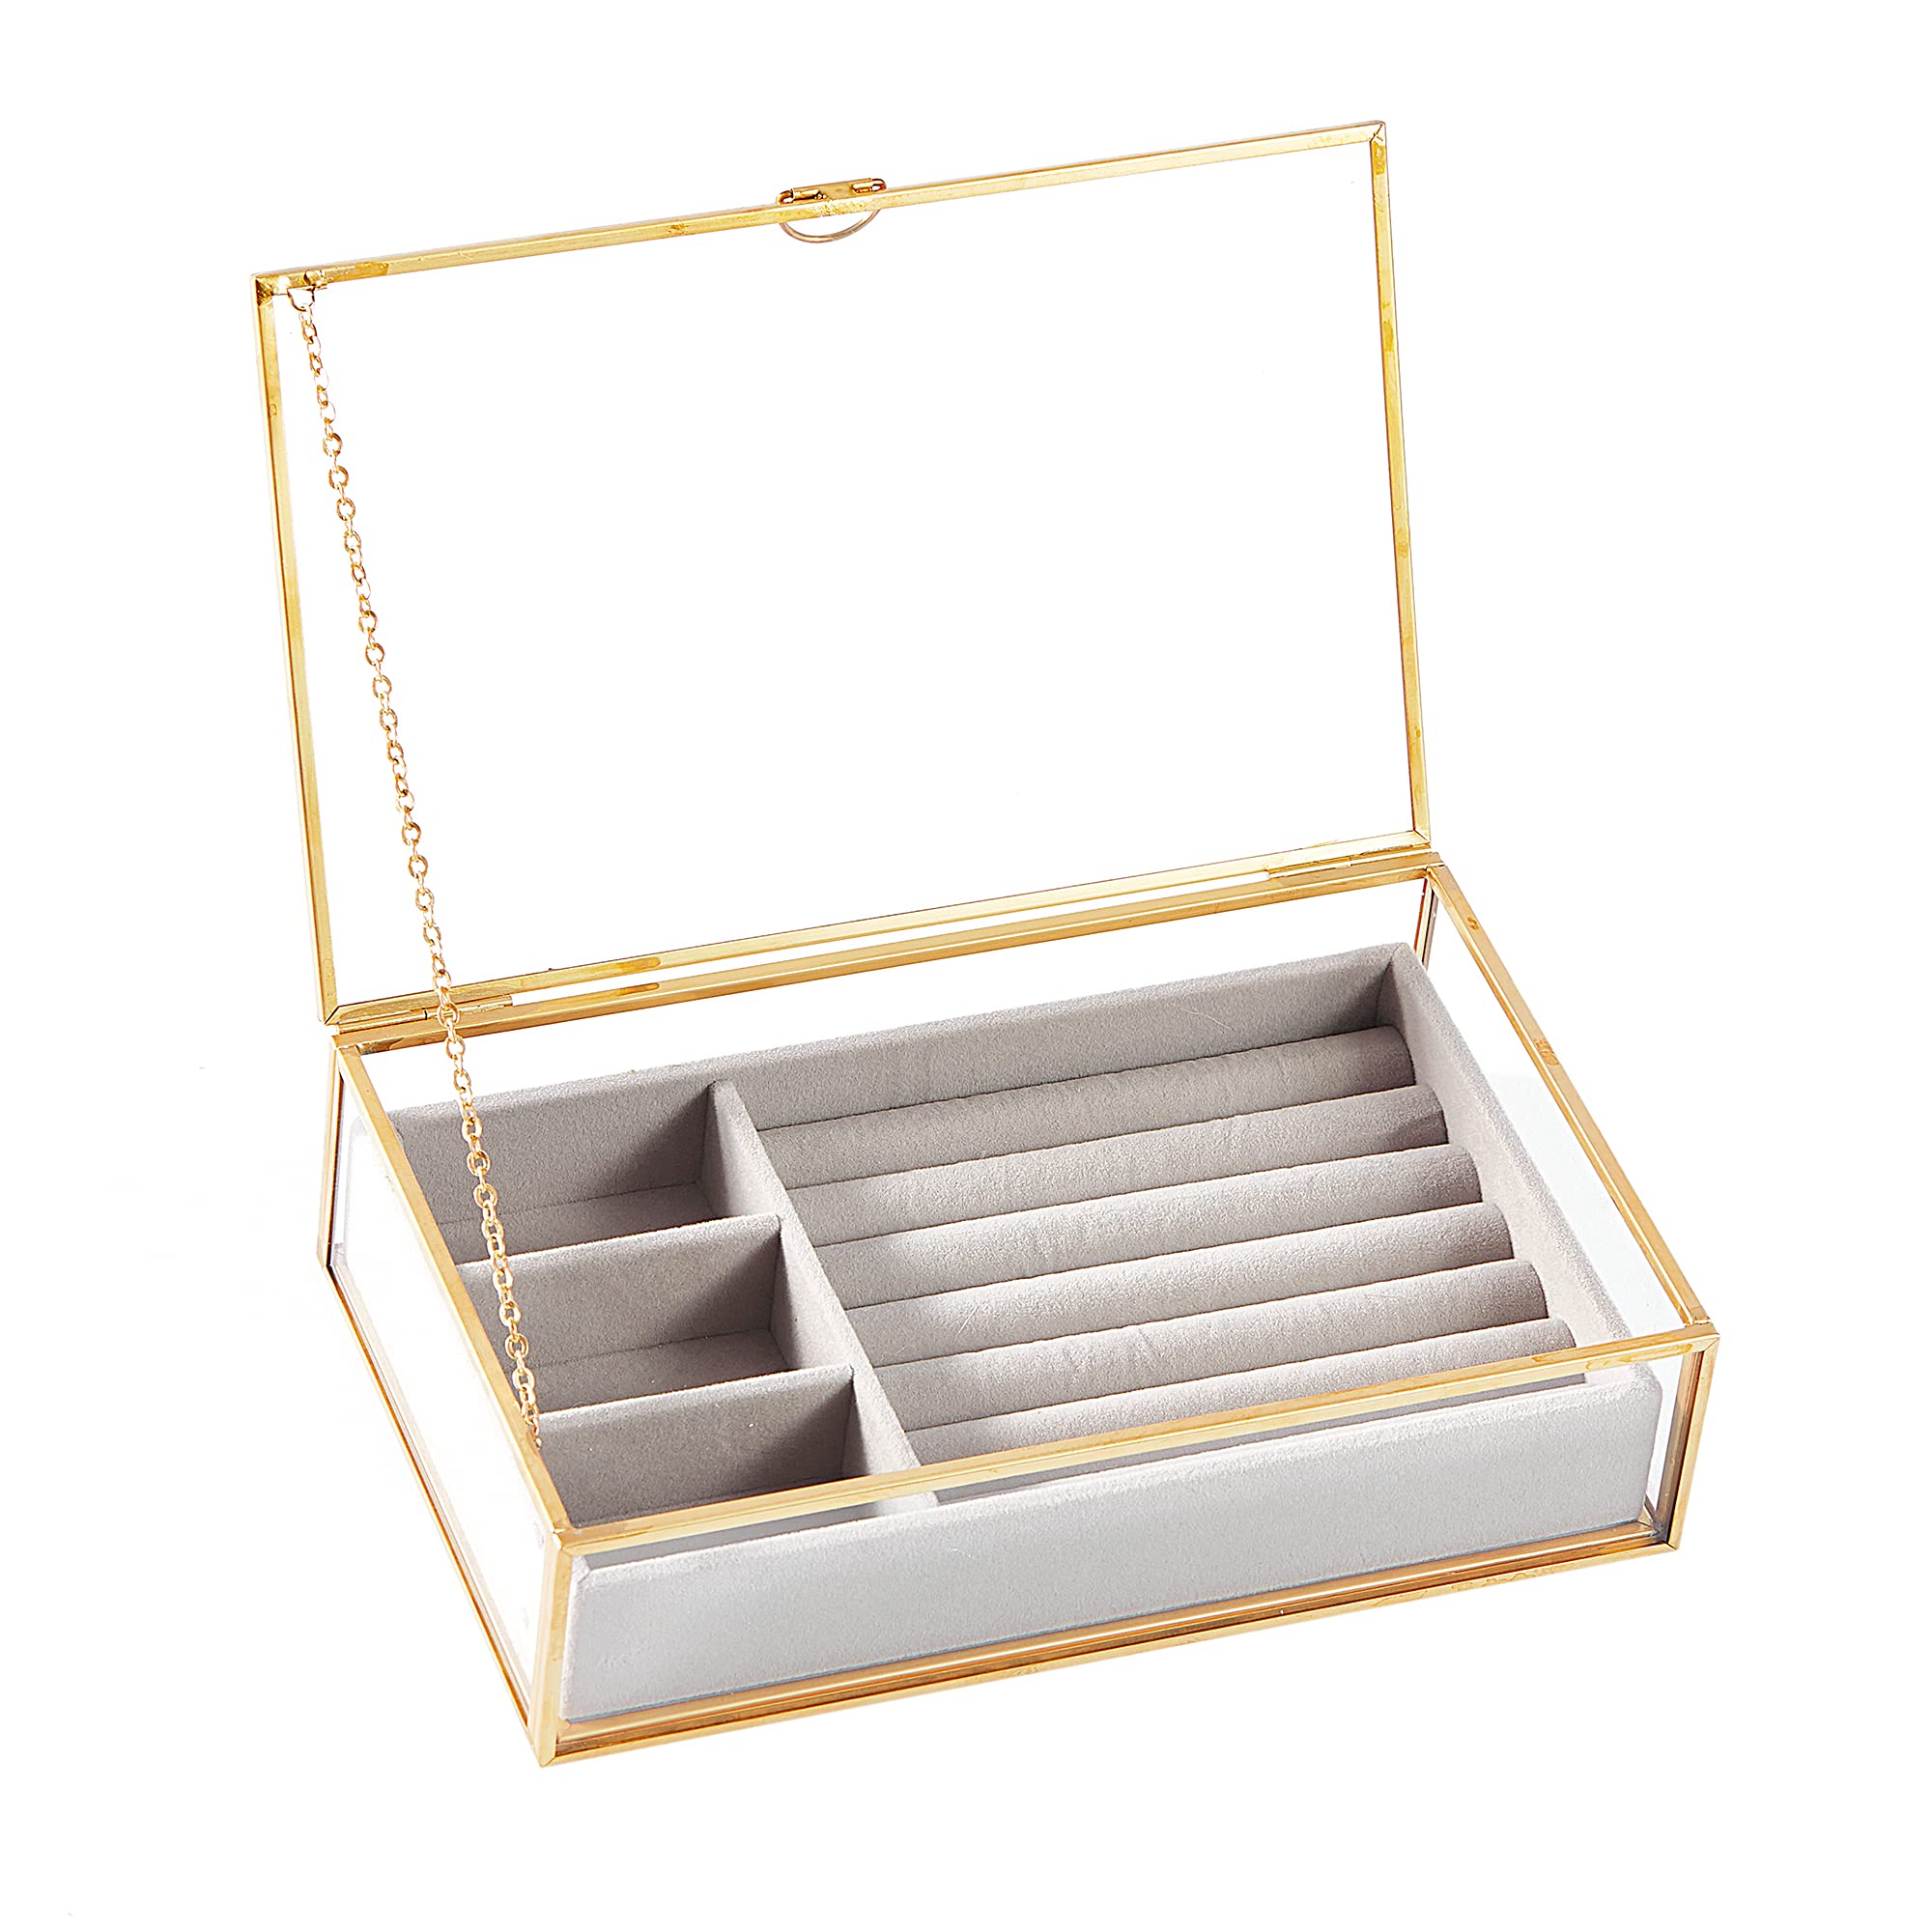 Golden Vintage Clear Glass Jewelry Box with Gray Velvet Organizer (8.3x5.3x2 ​in)